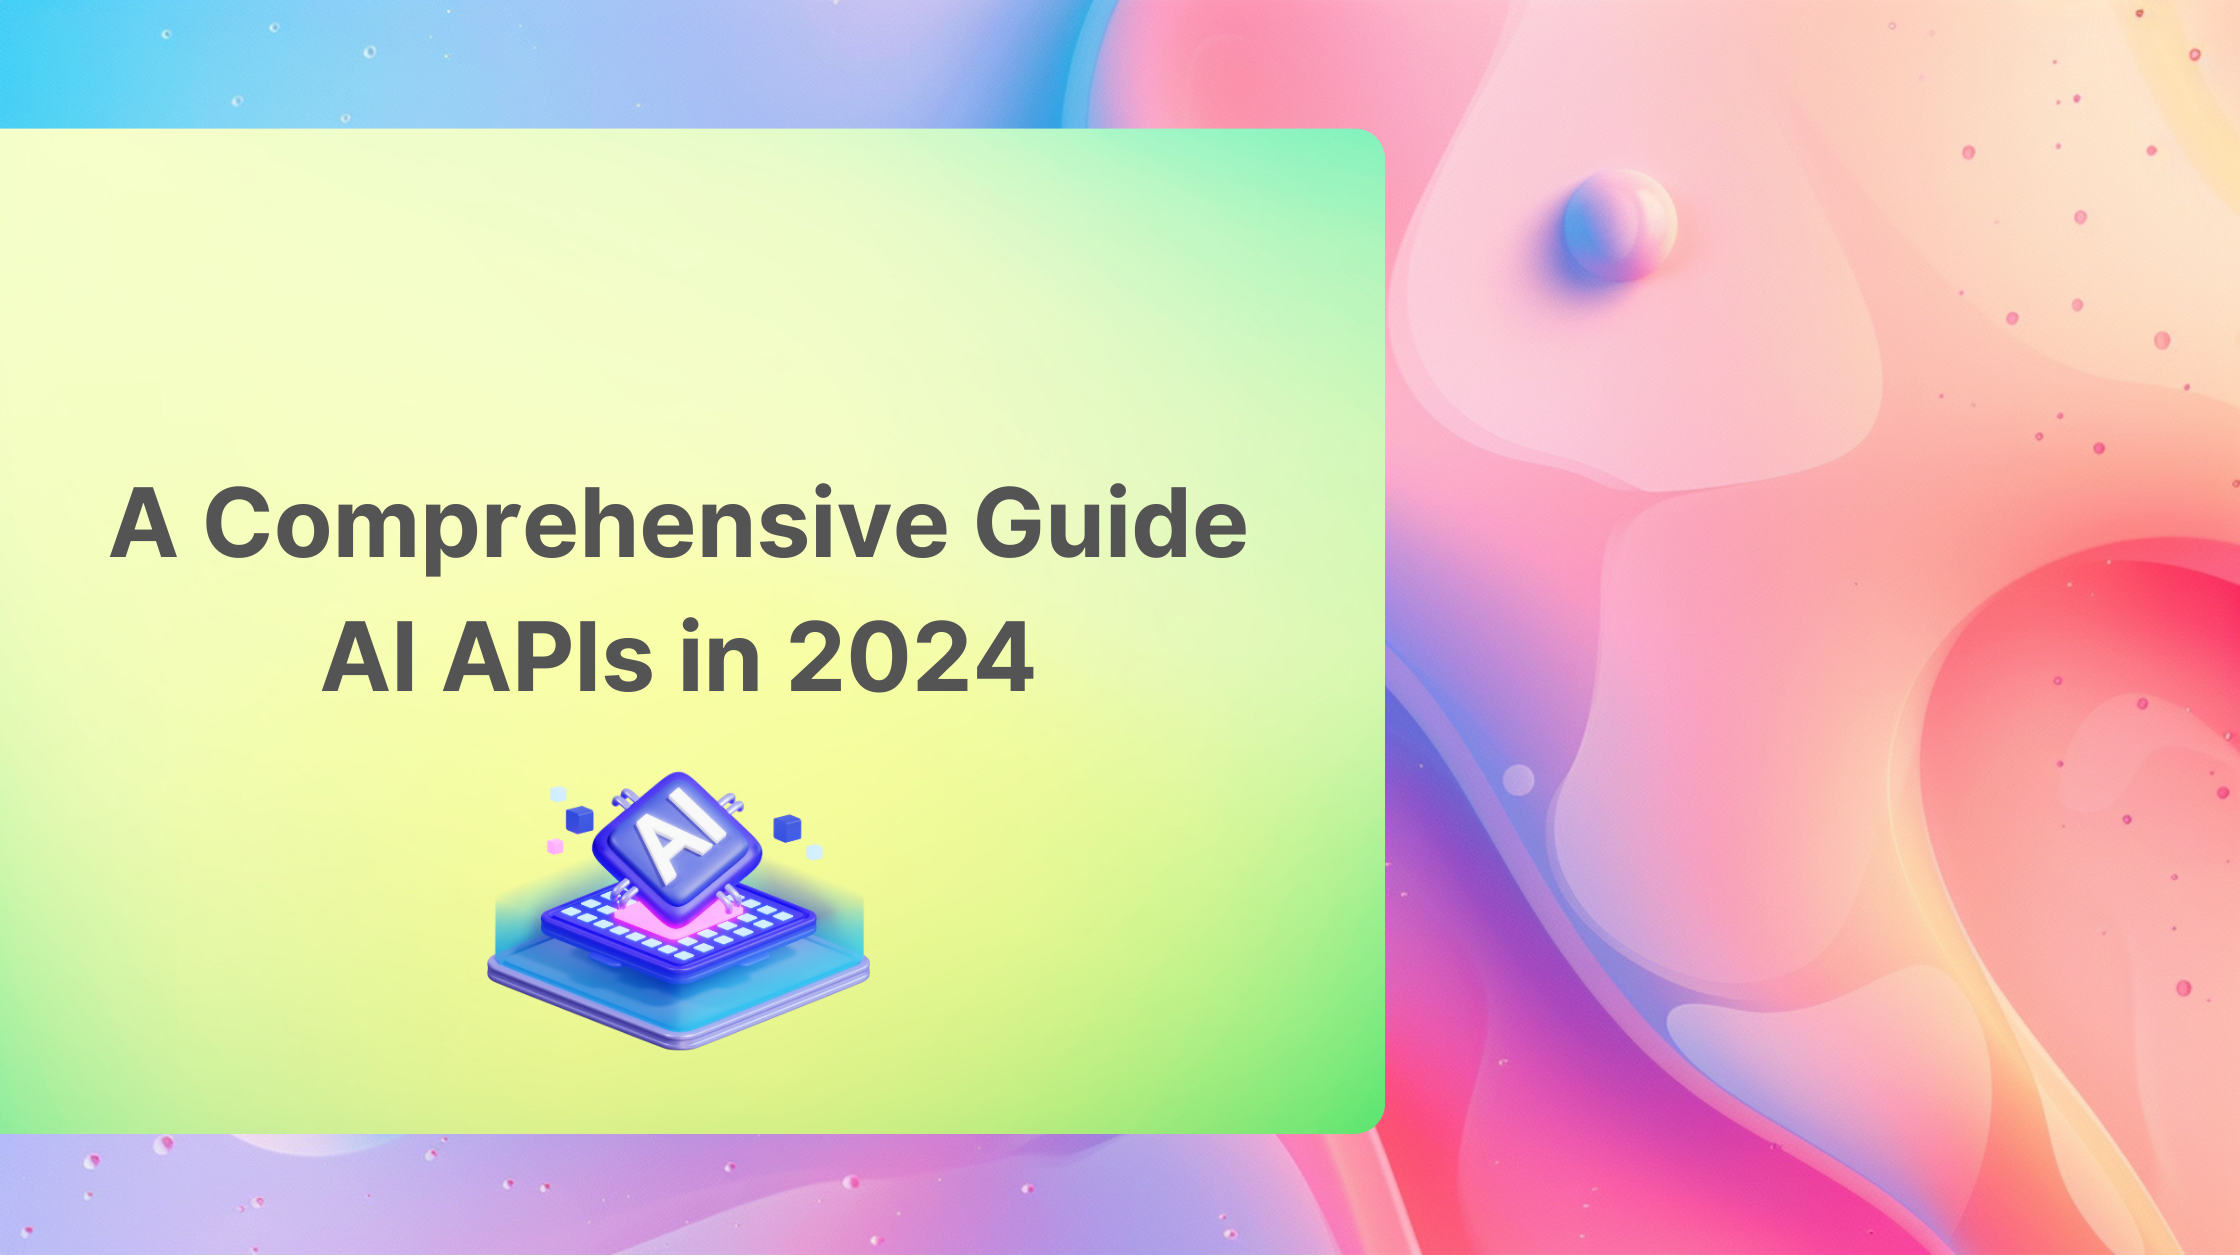 A Comprehensive Guide to all AI APIs in 2024